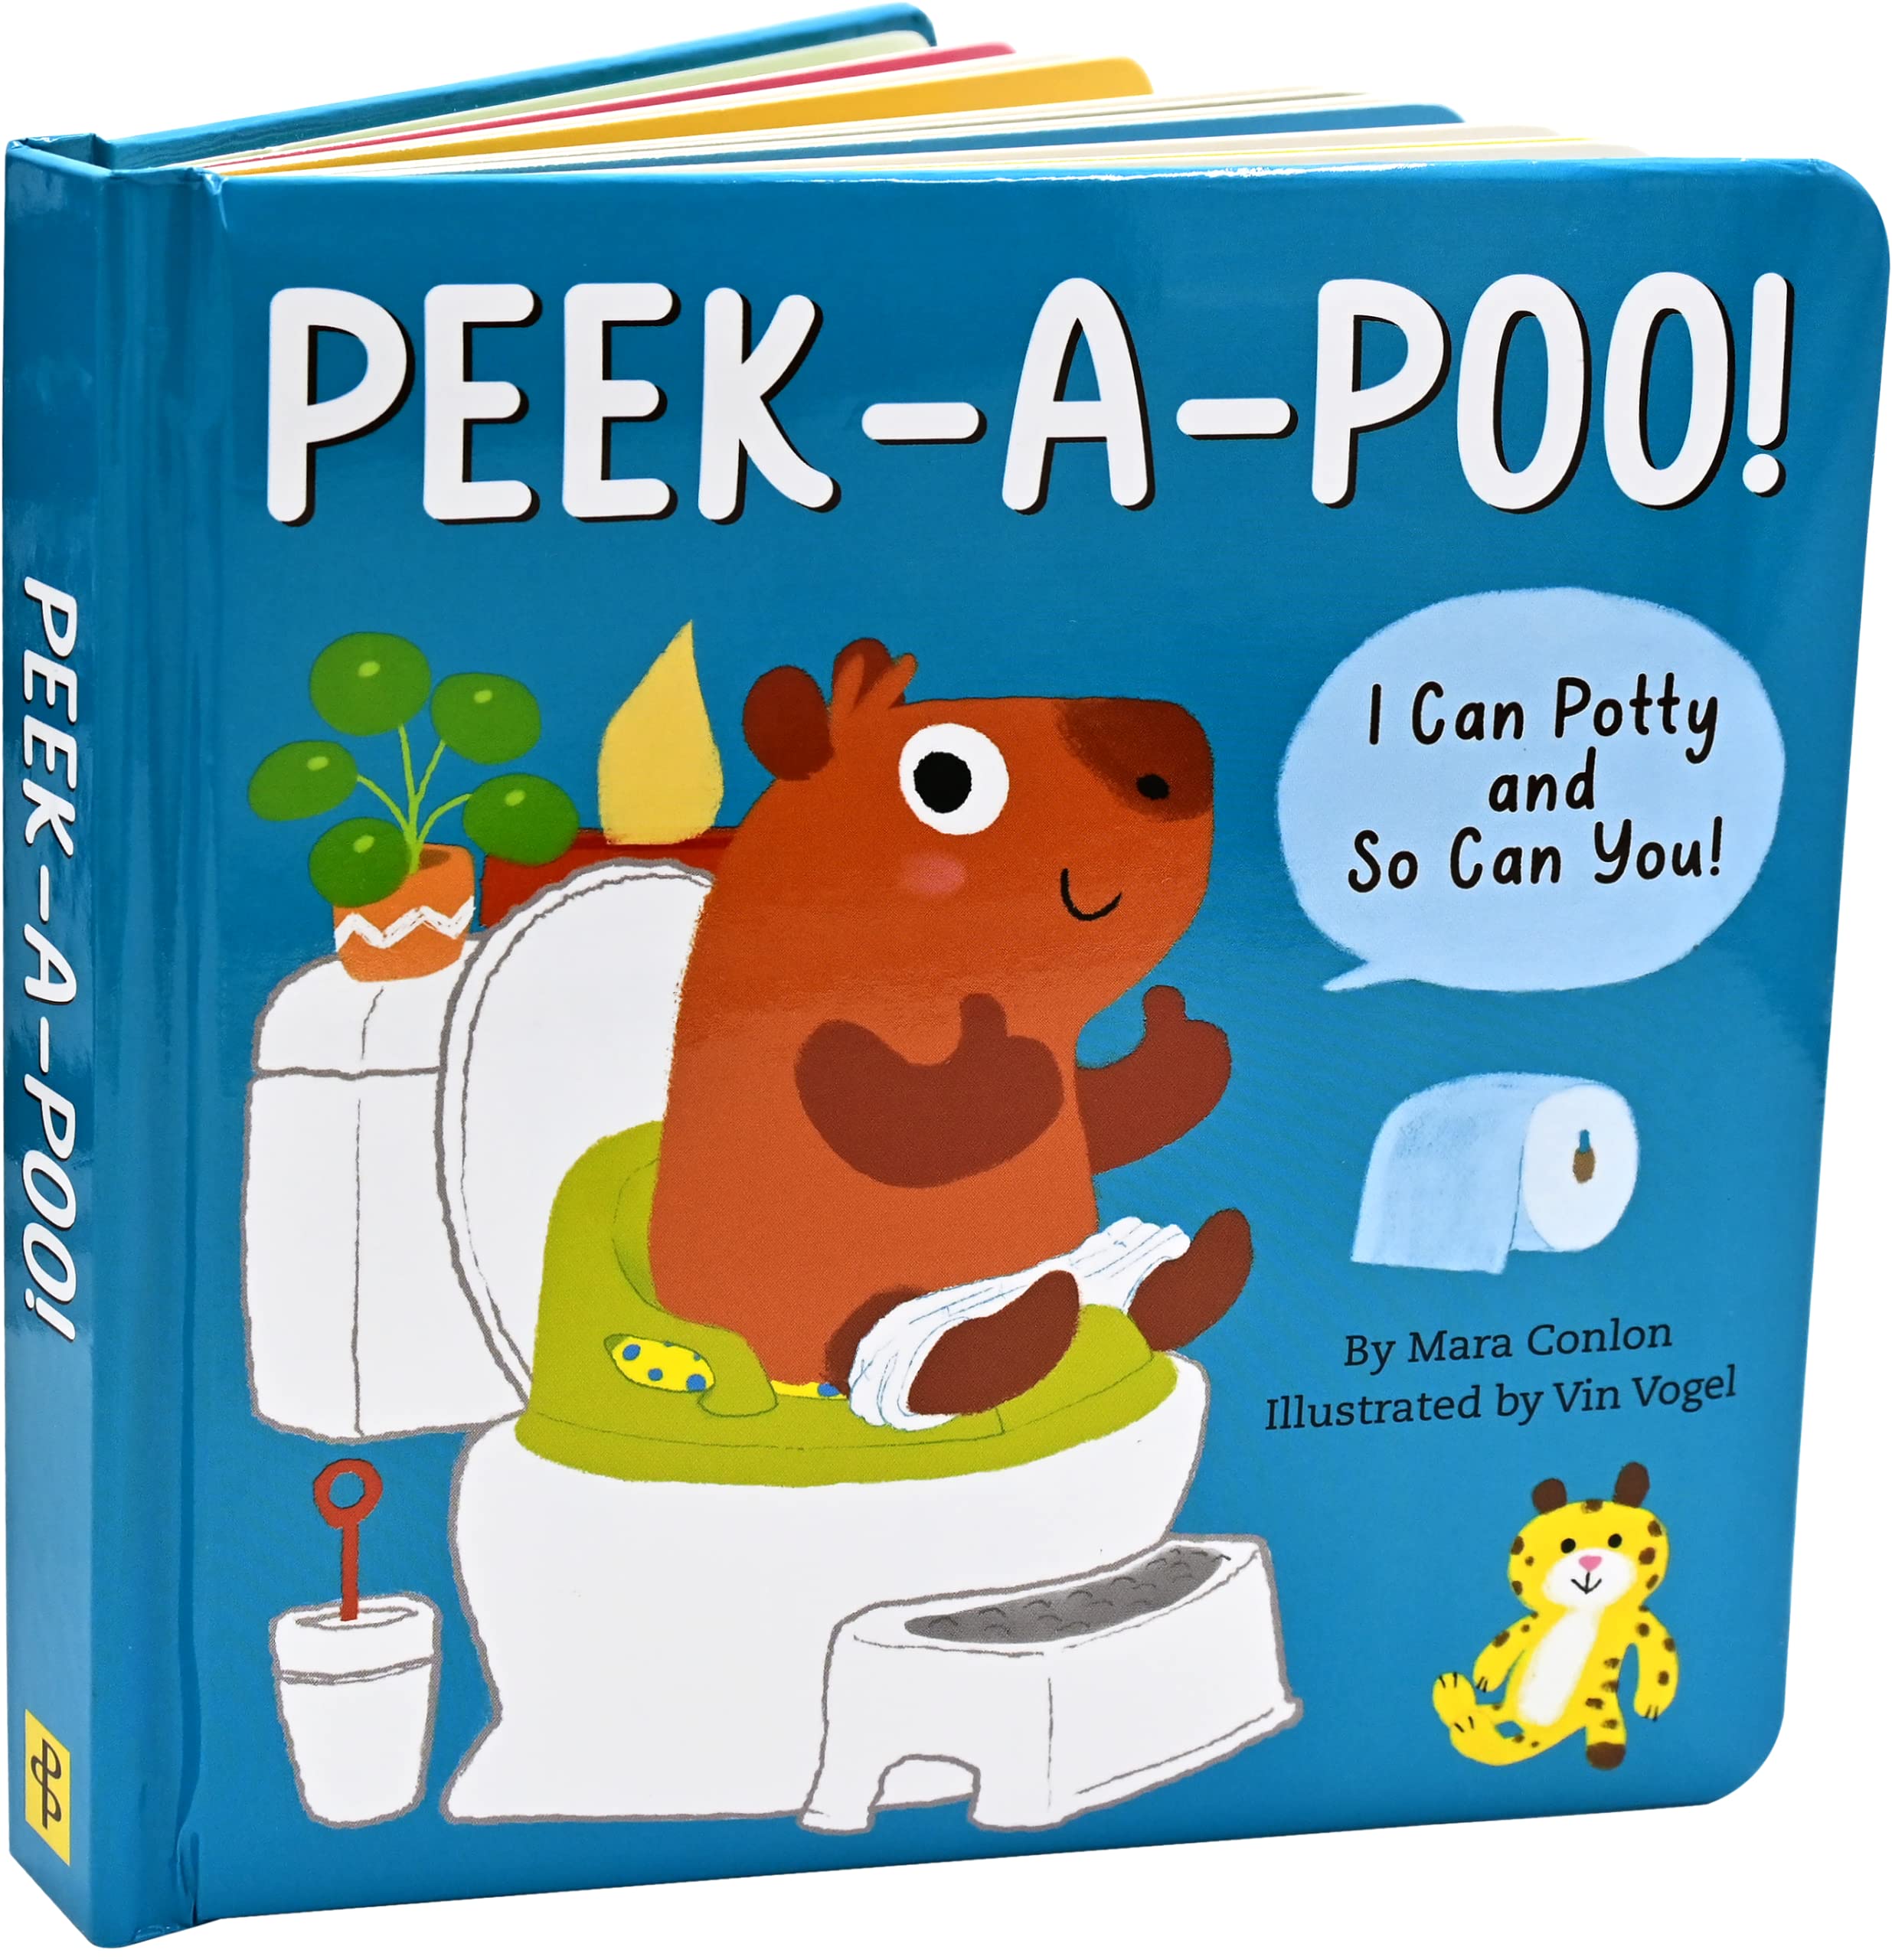 Peek-A-Poo! Board Book: I Can Potty and So Can You! by Conlon, Mara